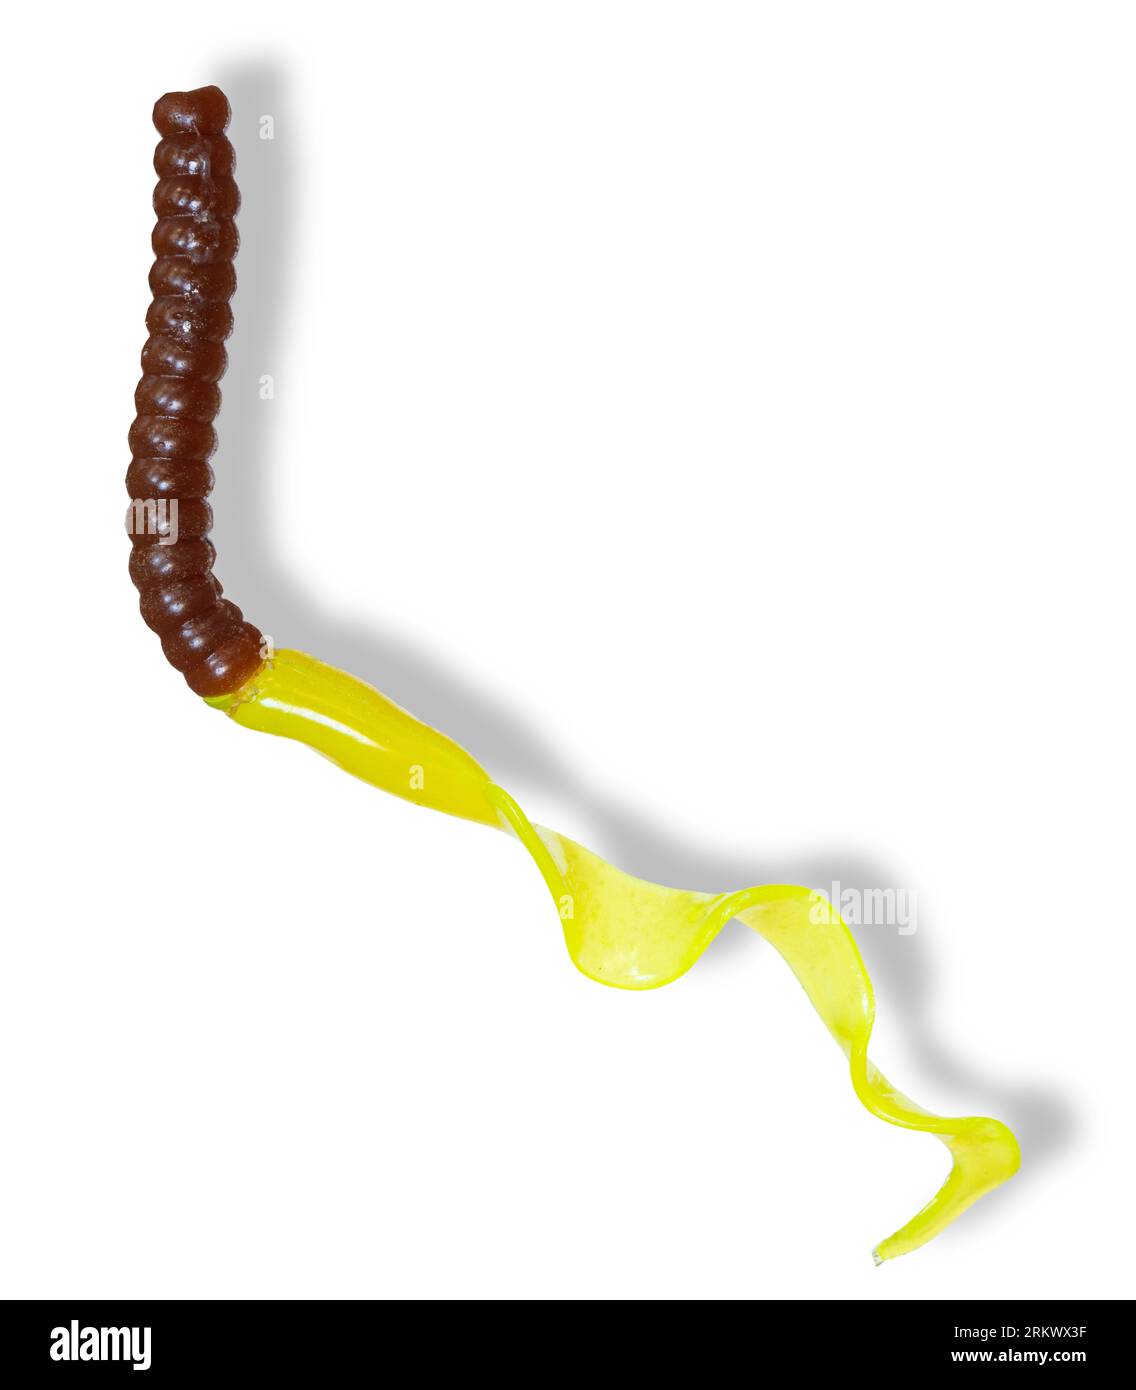 Brown and yellow artificial worm for fishing with a curly tail and shadow  underneath Stock Photo - Alamy